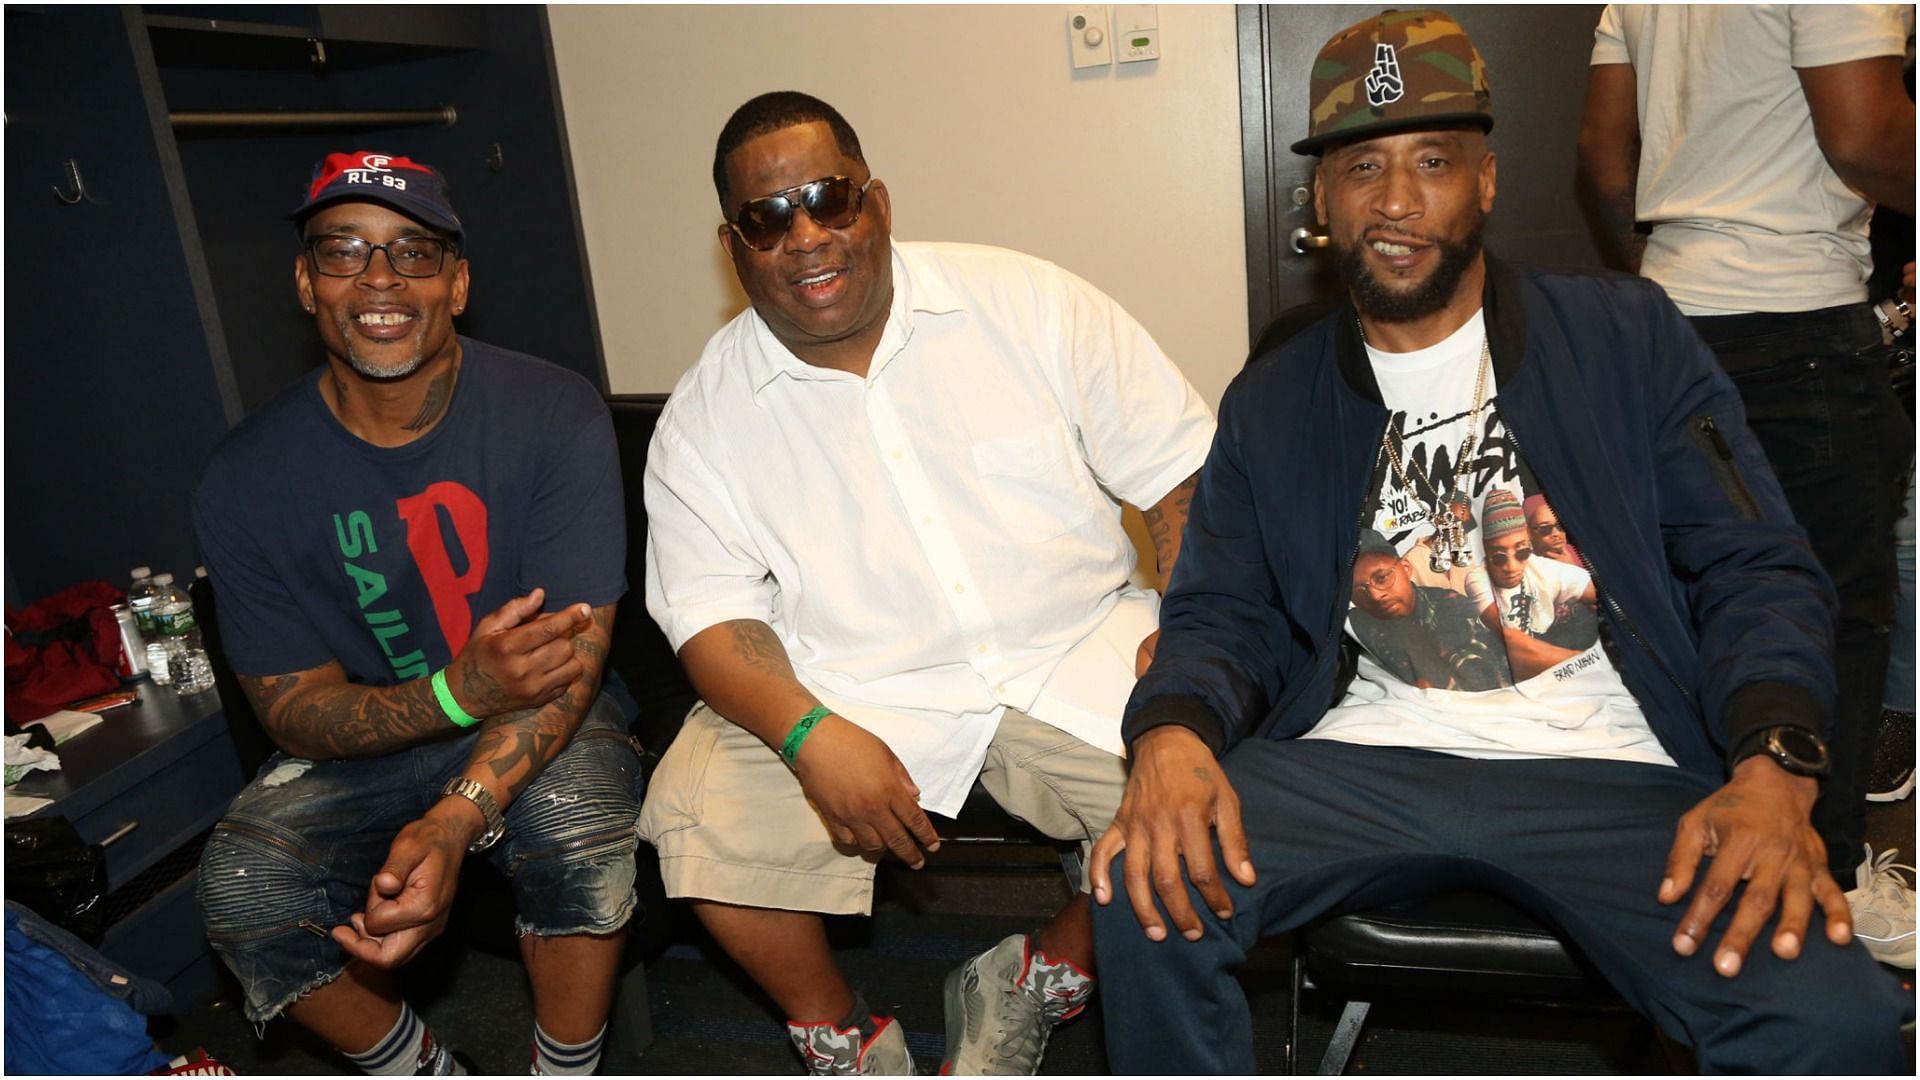 Sadat X, Grand Puba, and Lord Jamar of Brand Nubian attend the YO! MTV Raps 30th Anniversary Live Event at Barclays Center on June 1, 2018, in New York City (Image via Getty Images)